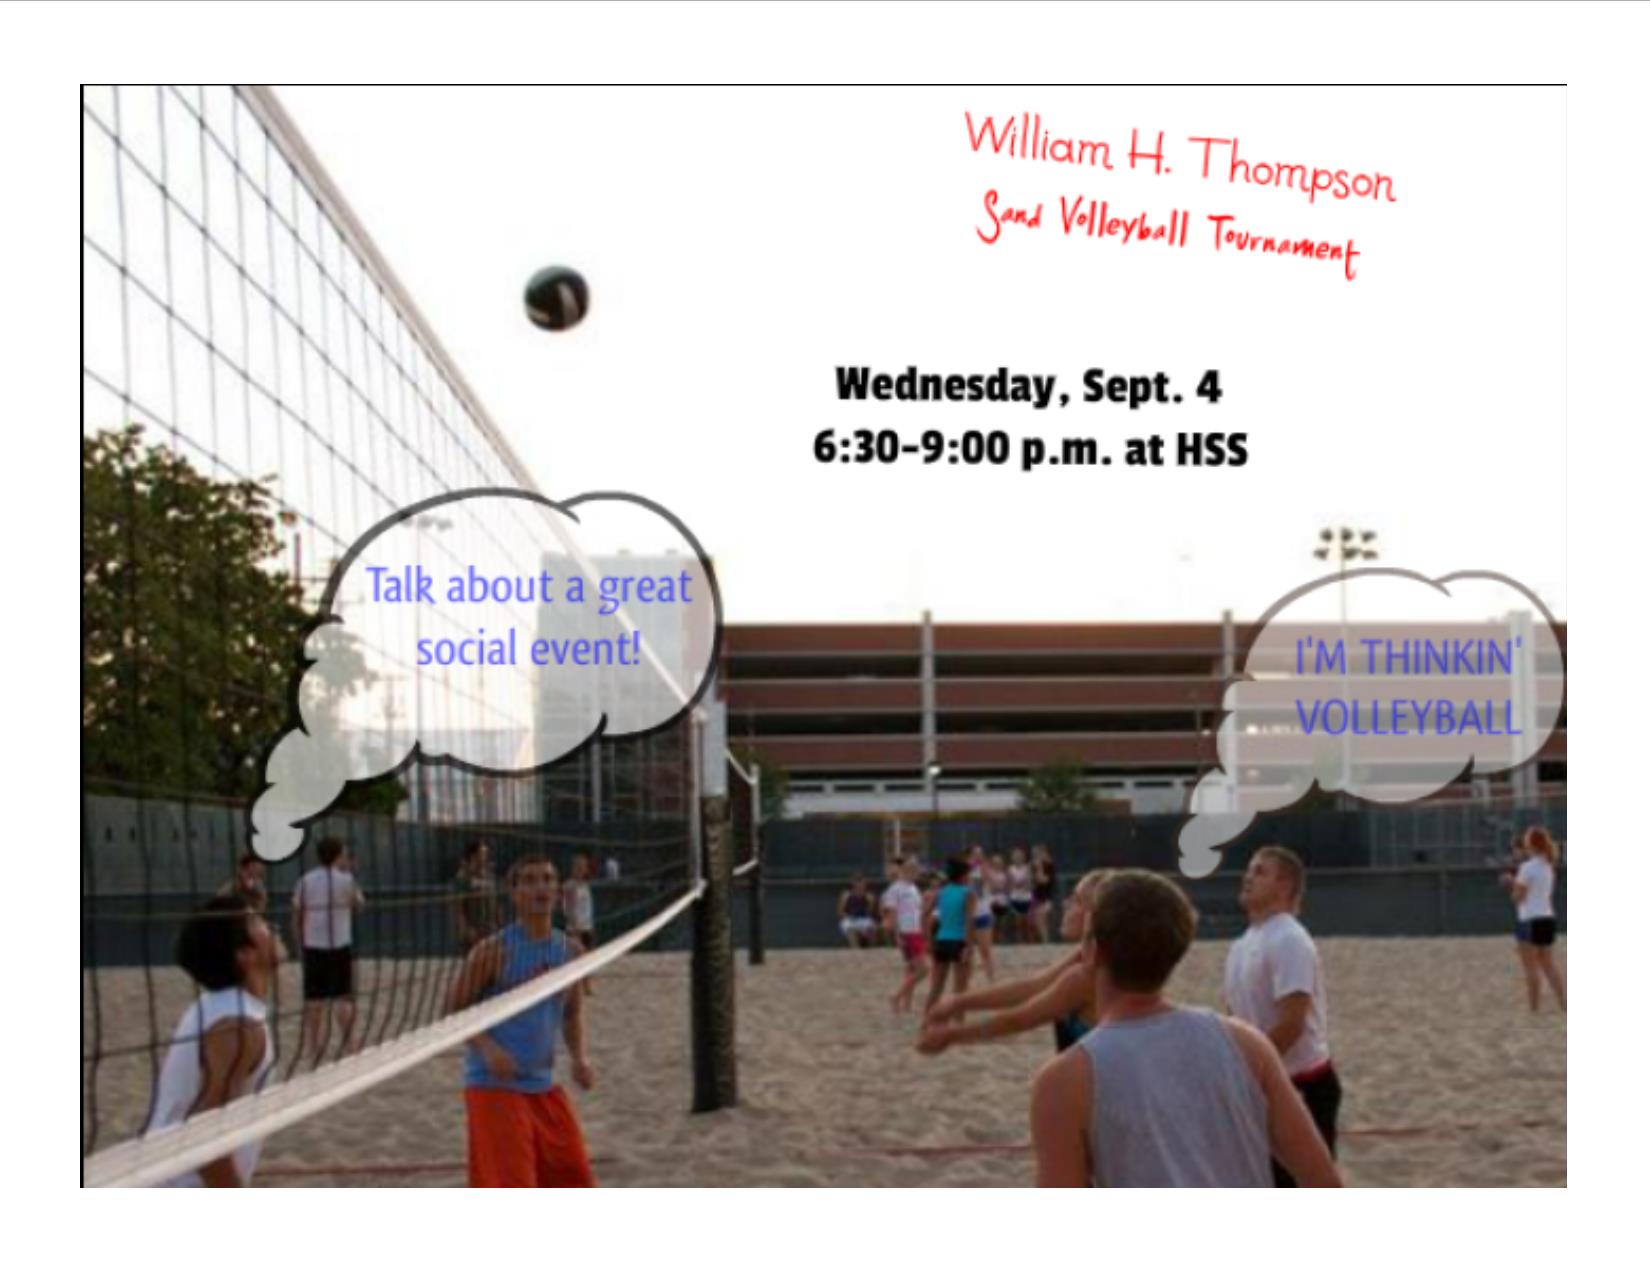 W.H. Thompson Sand Volleyball, Wed., Sept. 4 @ 6:30 p.m. @ HSS Volleyball Courts